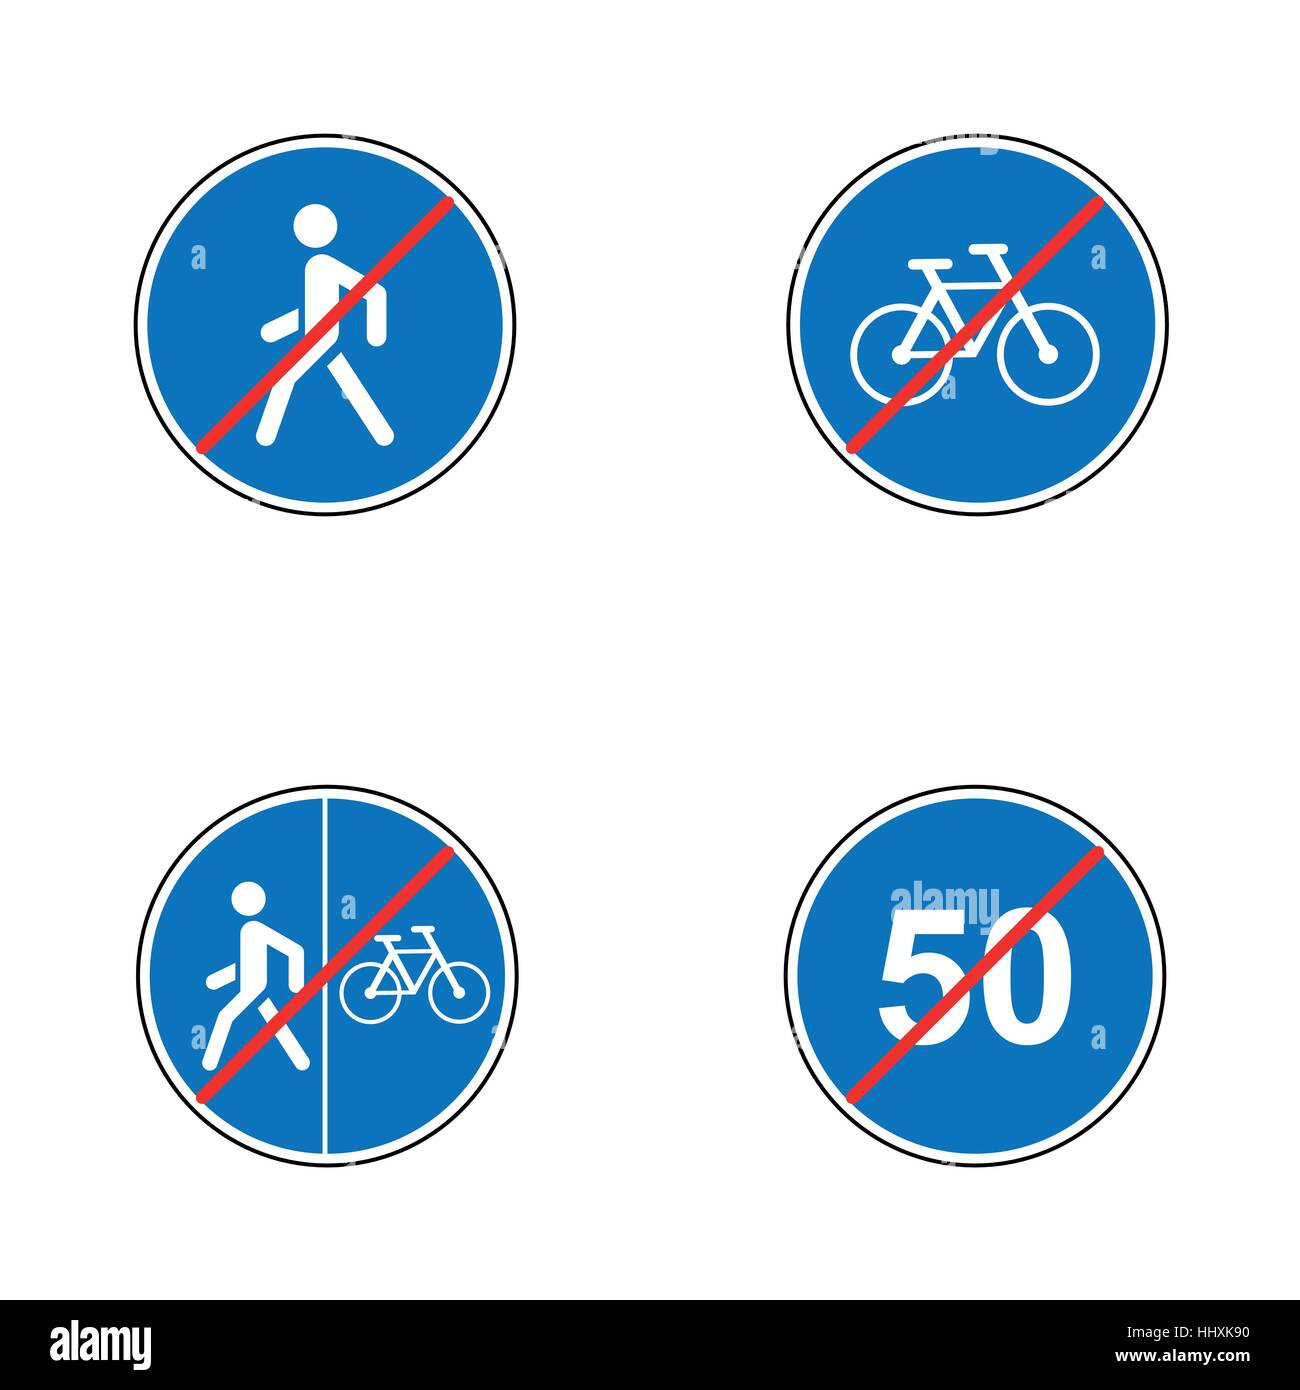 Set of road signs. Signboards. Collection of traffic signs. Vector illustration. End of speed limit, bikes, pedestrian route Stock Vector